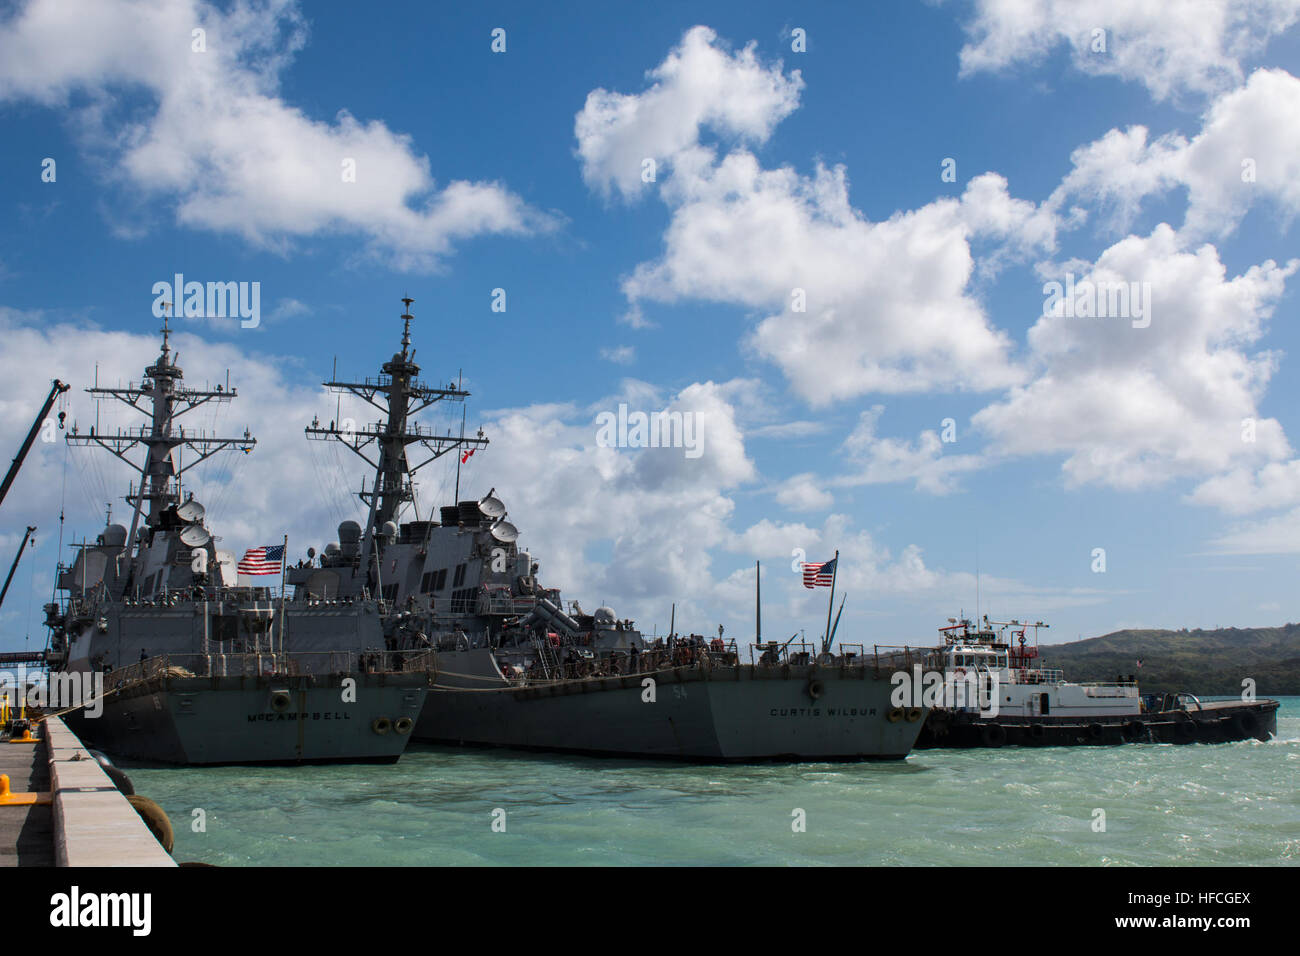 APRA HARBOR, Guam (March 4, 2016) – The destroyer USS Curtis Wilbur (DDG-54), gets tugged next to USS McCampbell (DDG-85) at Apra Harbor, U.S. Naval Base Guam, for a short in-port period prior to the bilateral exercise Multi-Sail 2016 (MS-16). Ten total naval surface combatants assigned to the U.S. and Japanese navies arrived in-port to Apra Harbor, increasing the total number of visiting and home-ported vessels at the base to 20 and marked the largest contingent of vessels in Apra Harbor in more than 30 years. (Released/Jeff Landis, Major, USMC (Ret.), Director of Public Affairs/Communication Stock Photo